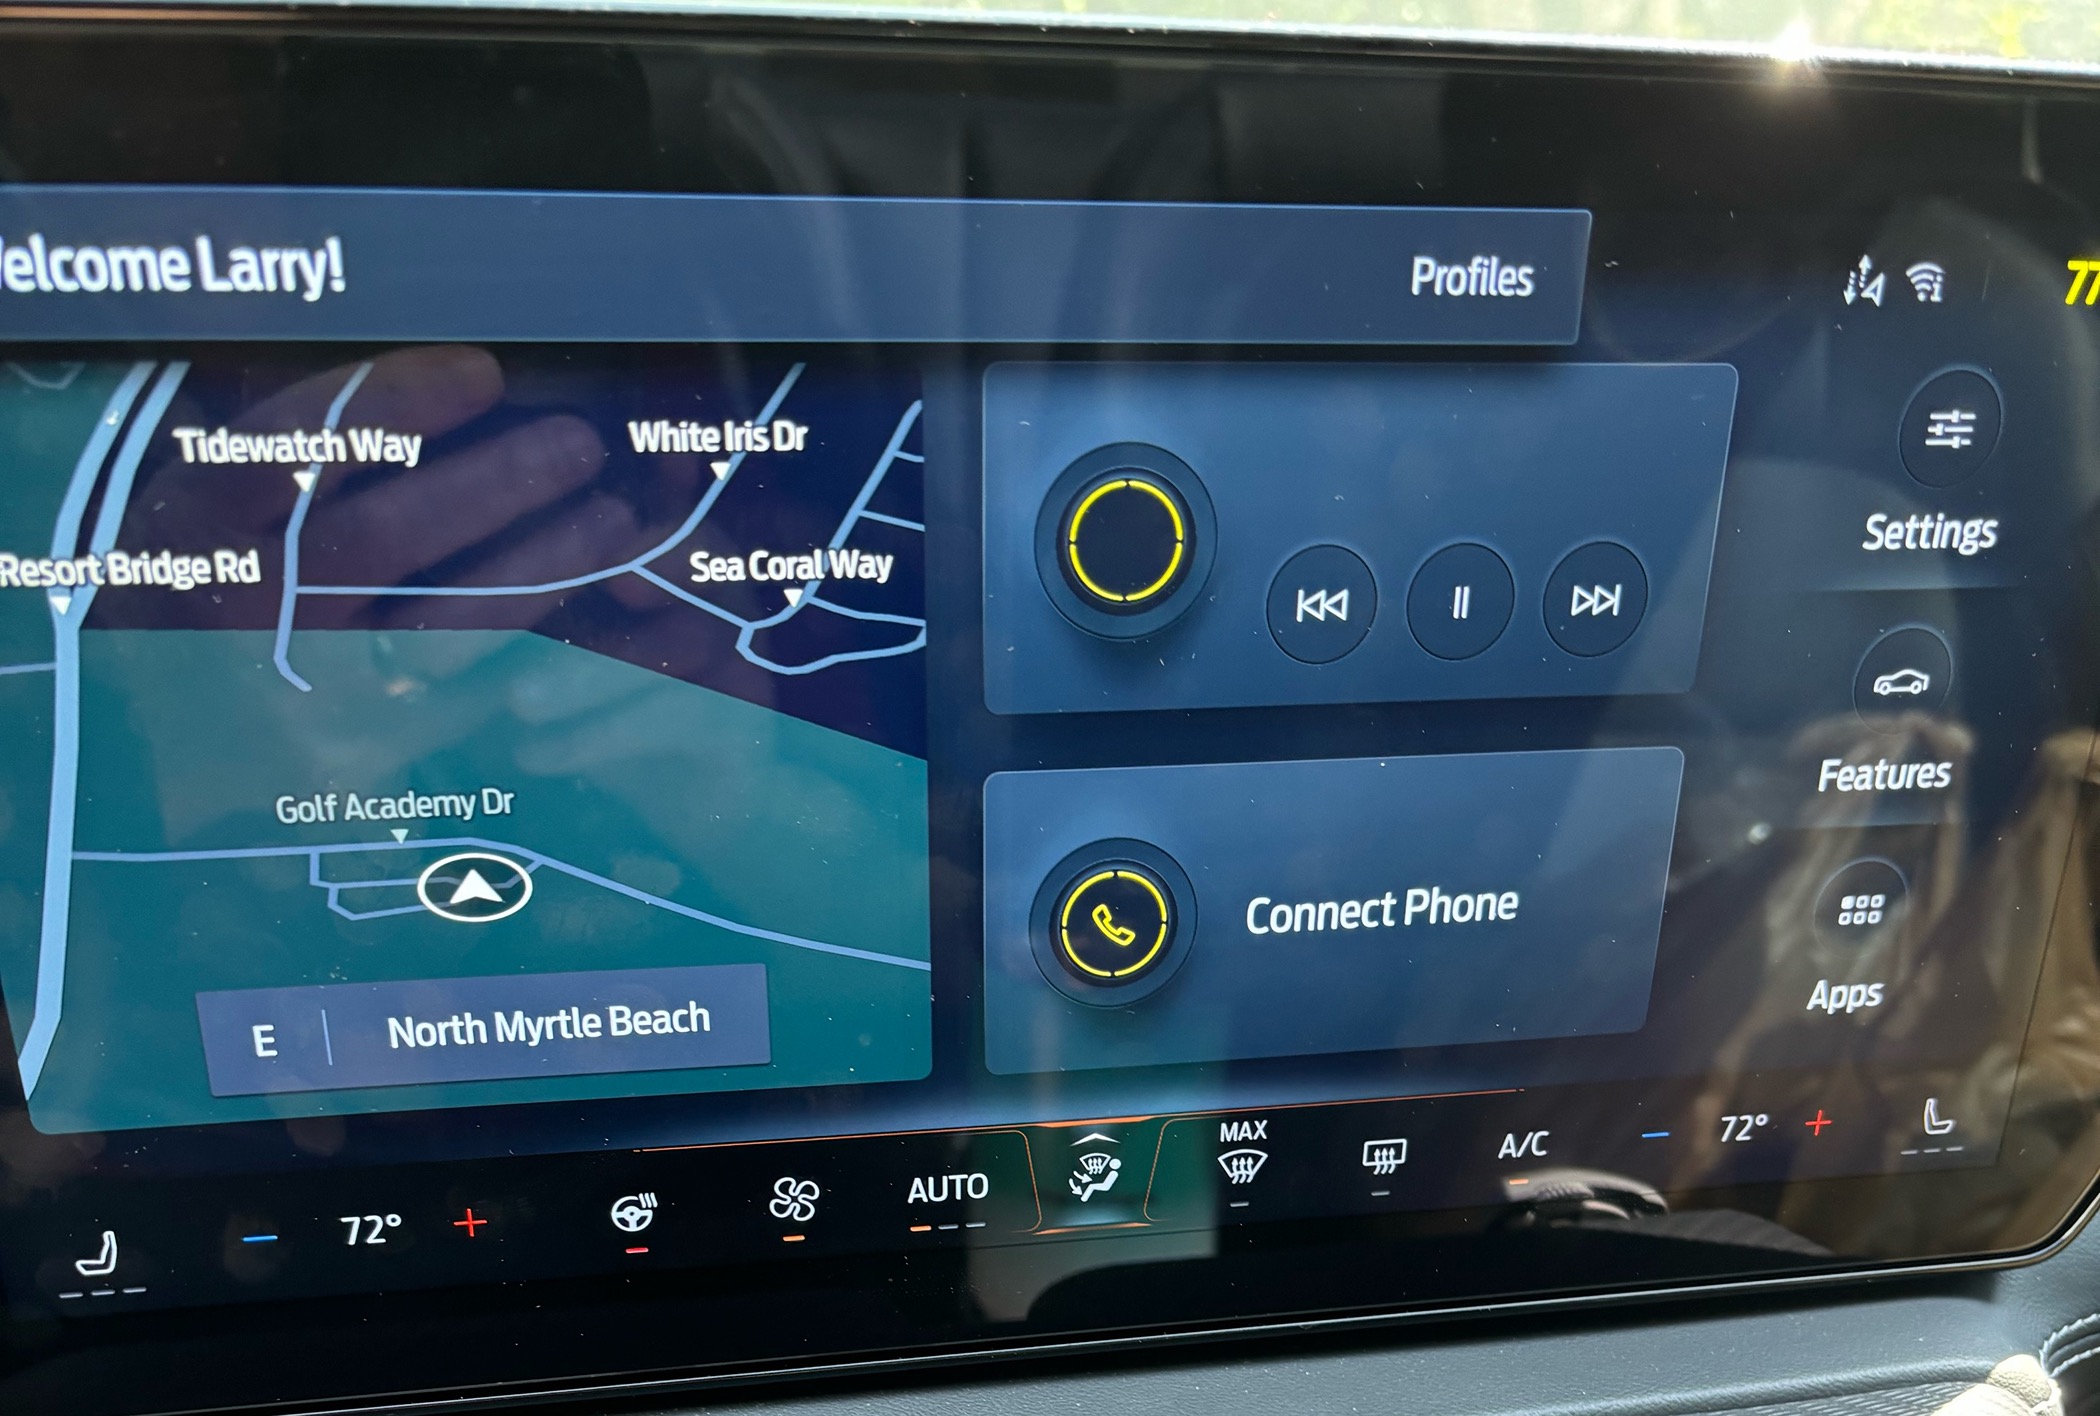 S650 Mustang Infotainment System is Challenging! IMG_2276